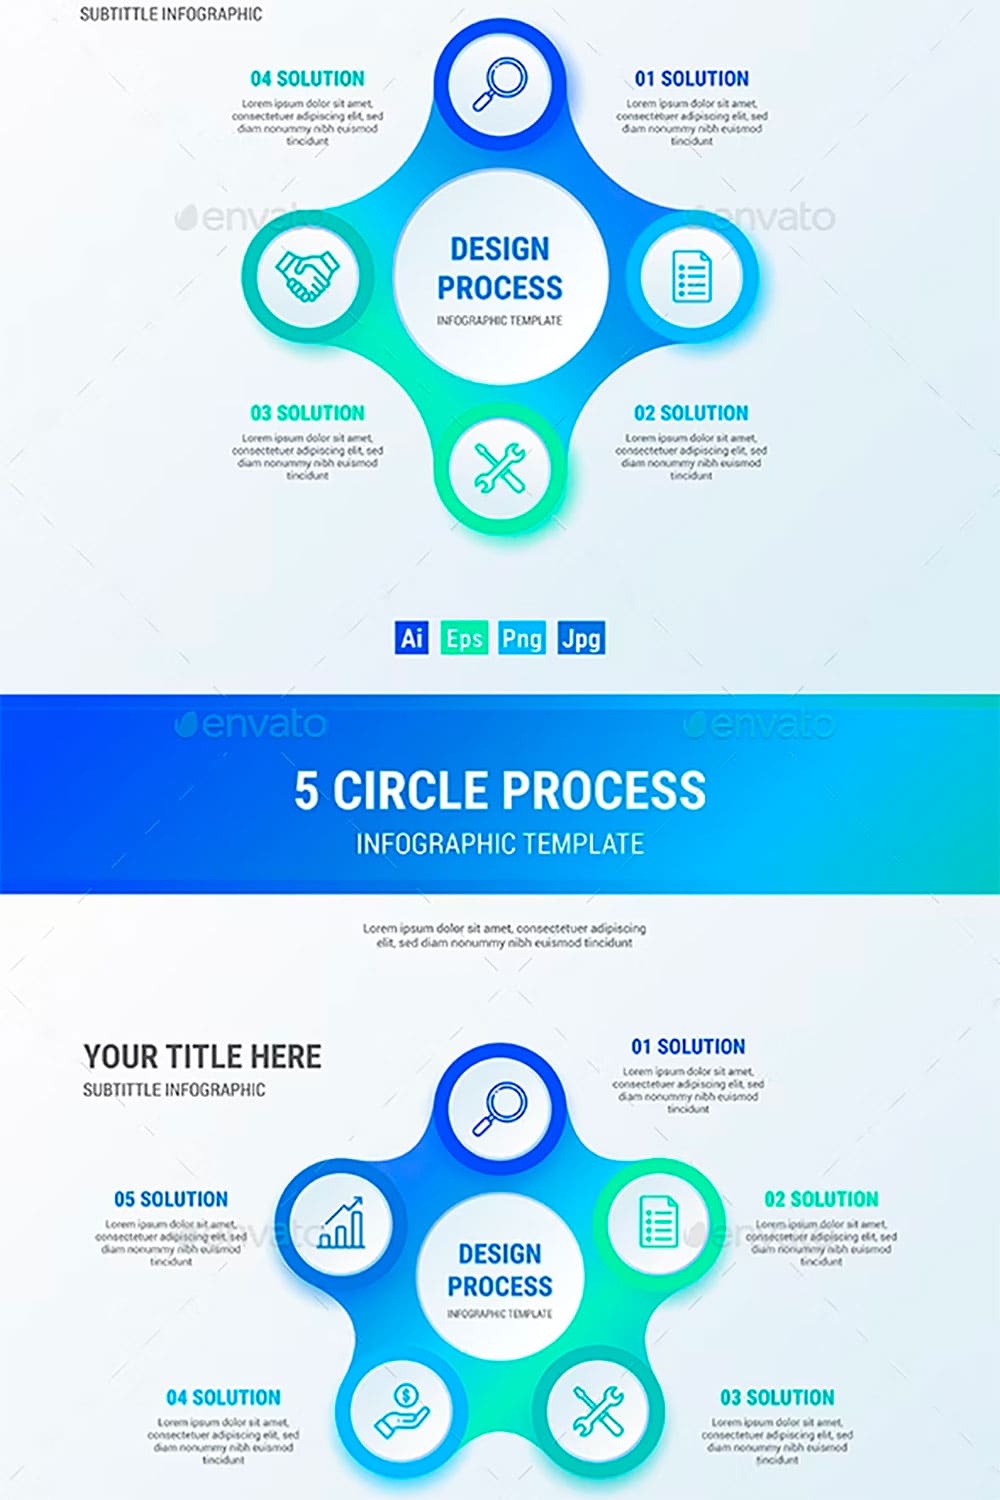 Circle process infographic, picture for pinterest.